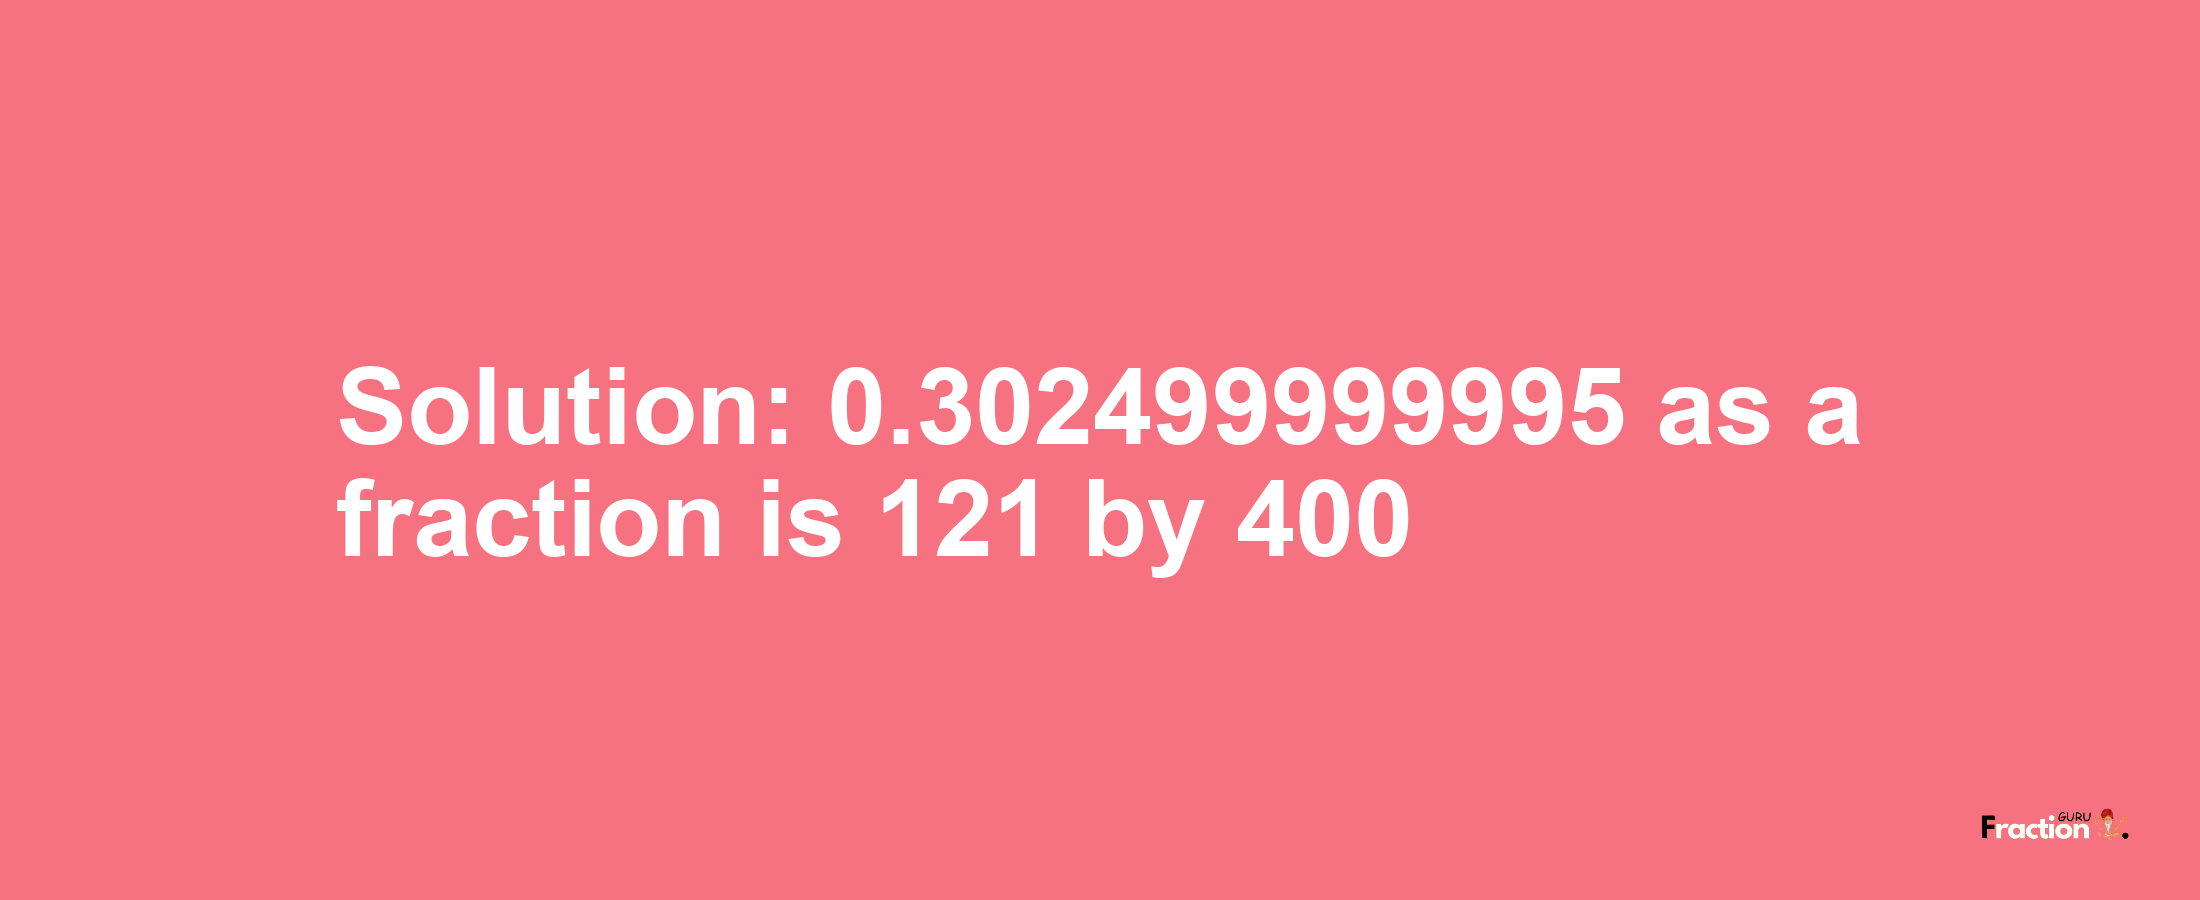 Solution:0.302499999995 as a fraction is 121/400